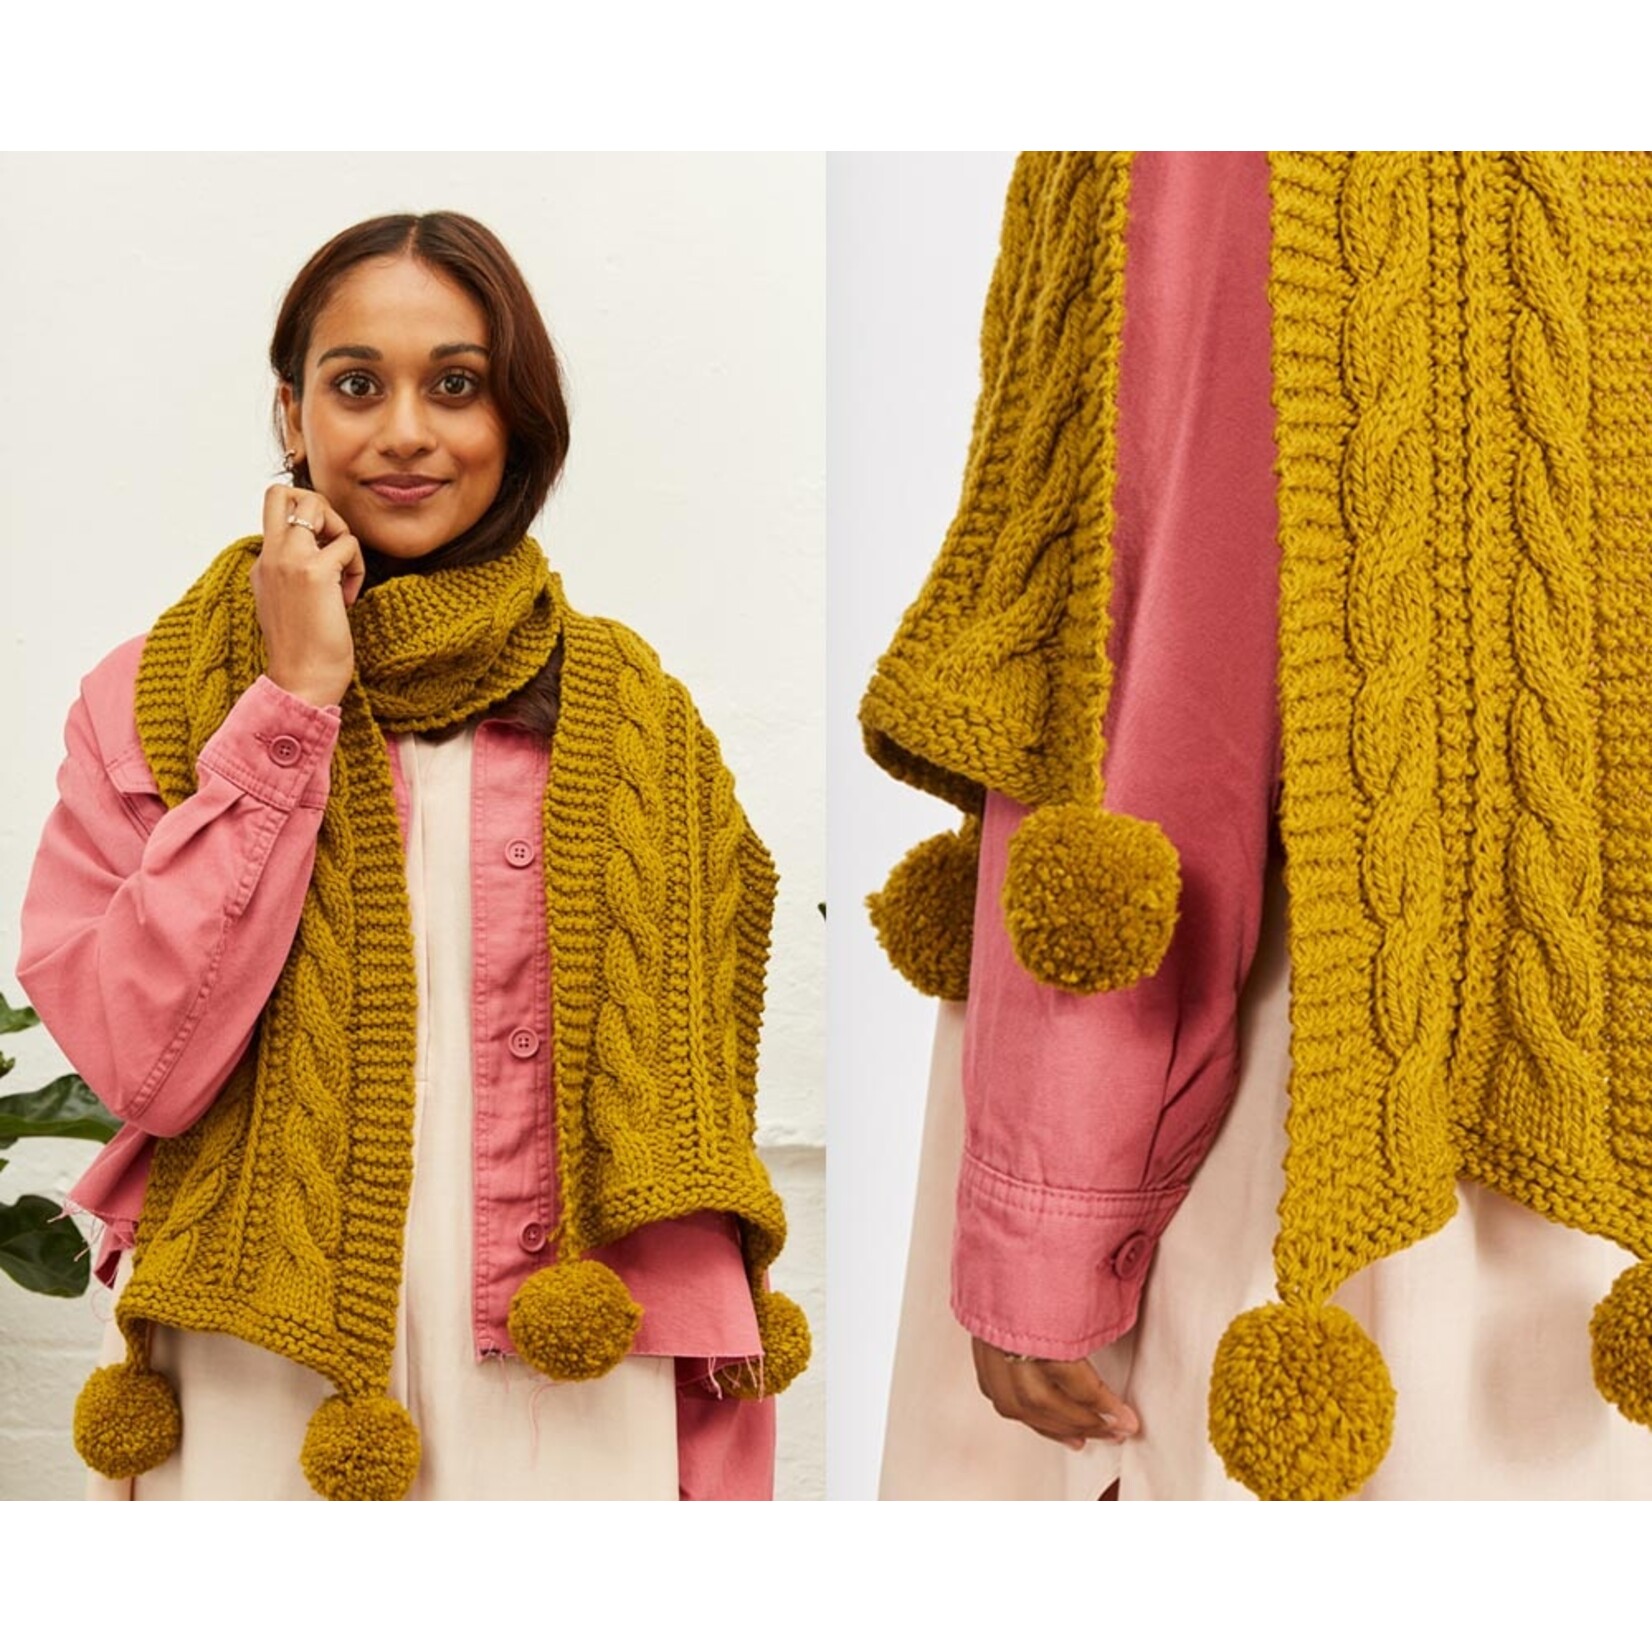 Pom Pom Publishing KNIT HOW: Simple Knits, Tools & Tips